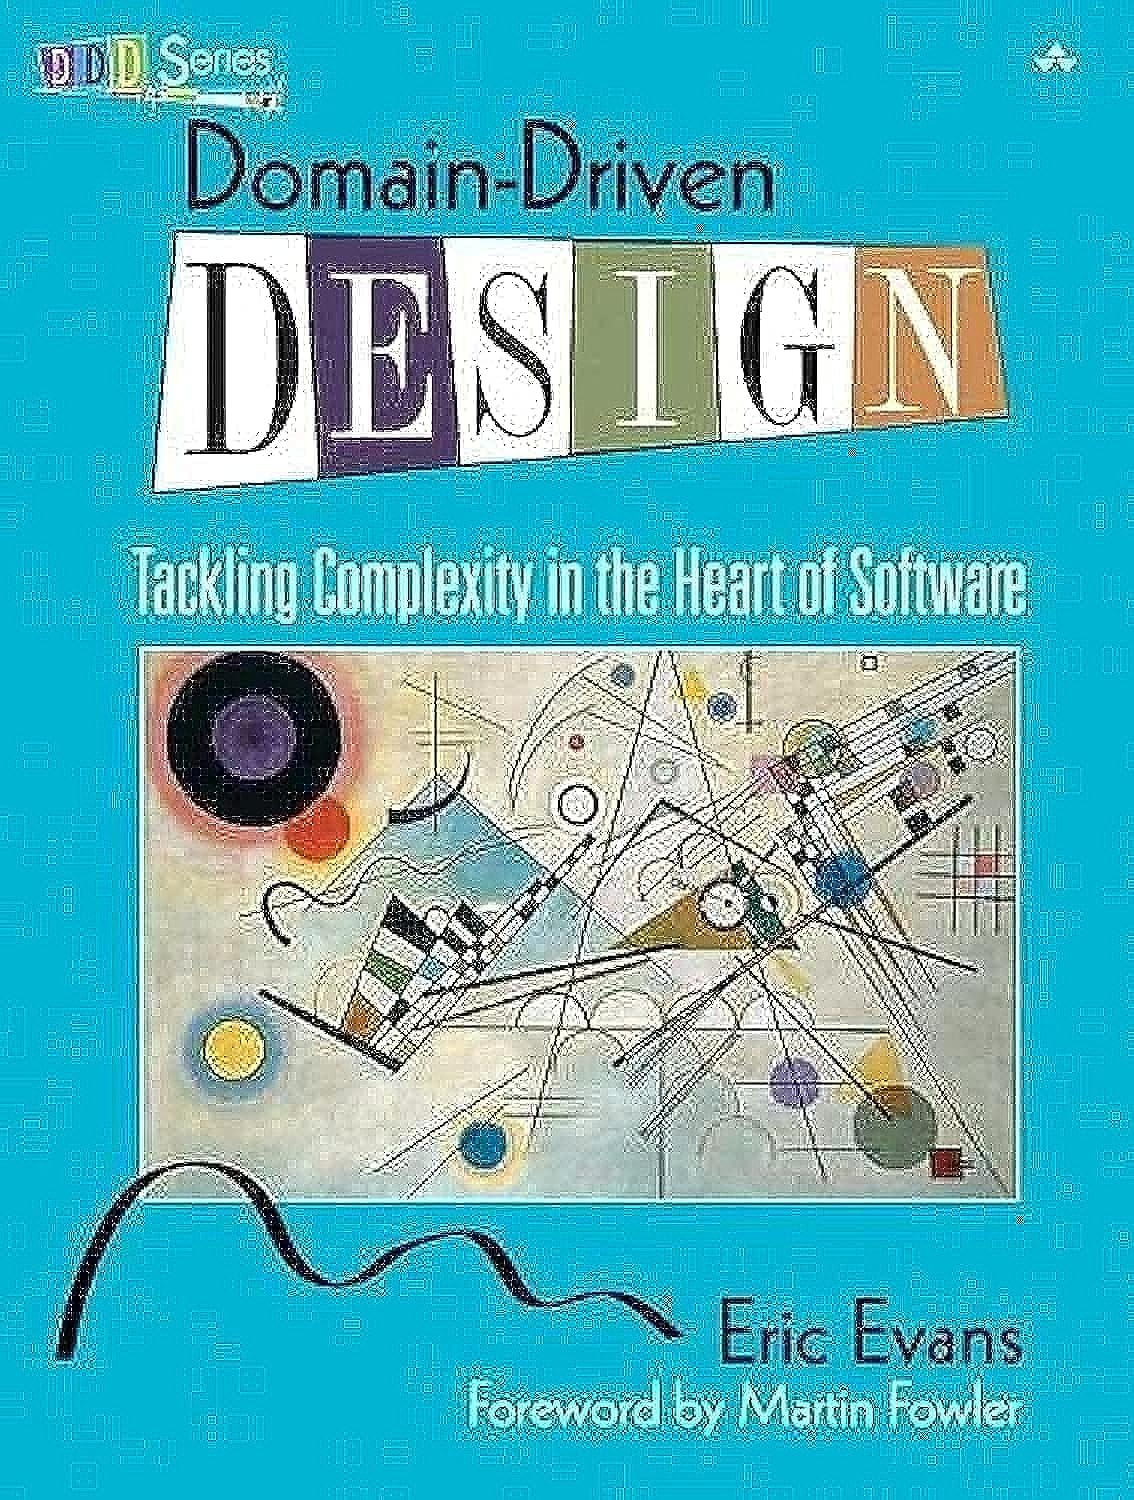 Domain-Driven Design: Tackling Complexity in the Heart of Software